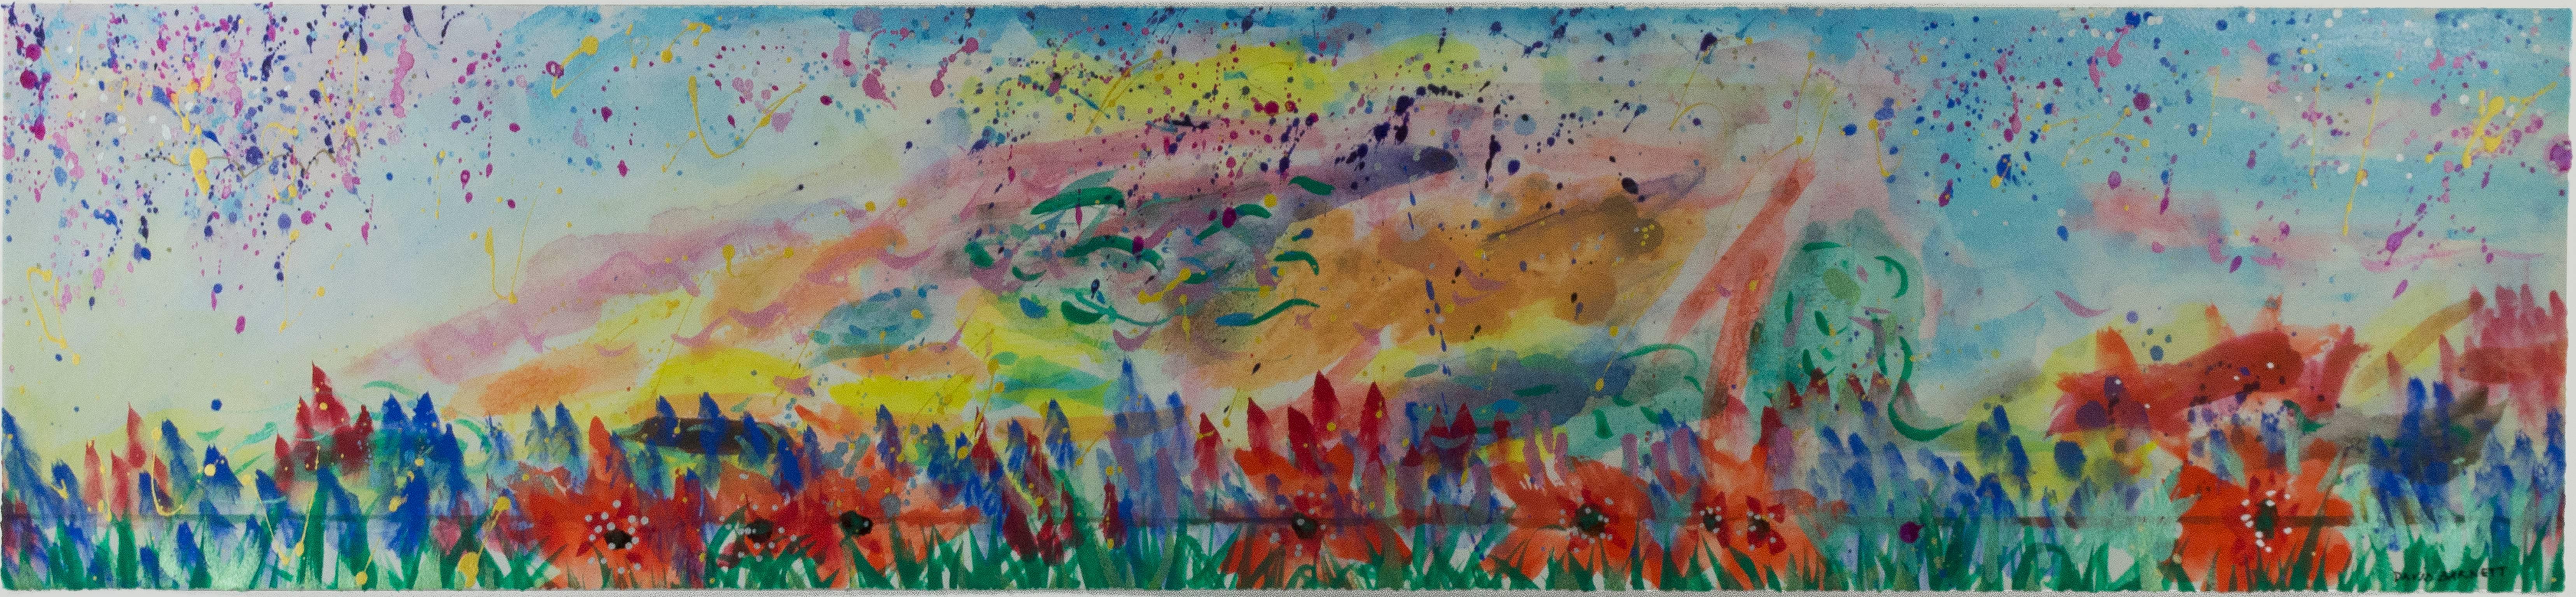 "Abstract with Grass and Poppies II, " Mixed Media Landscape by David Barnett